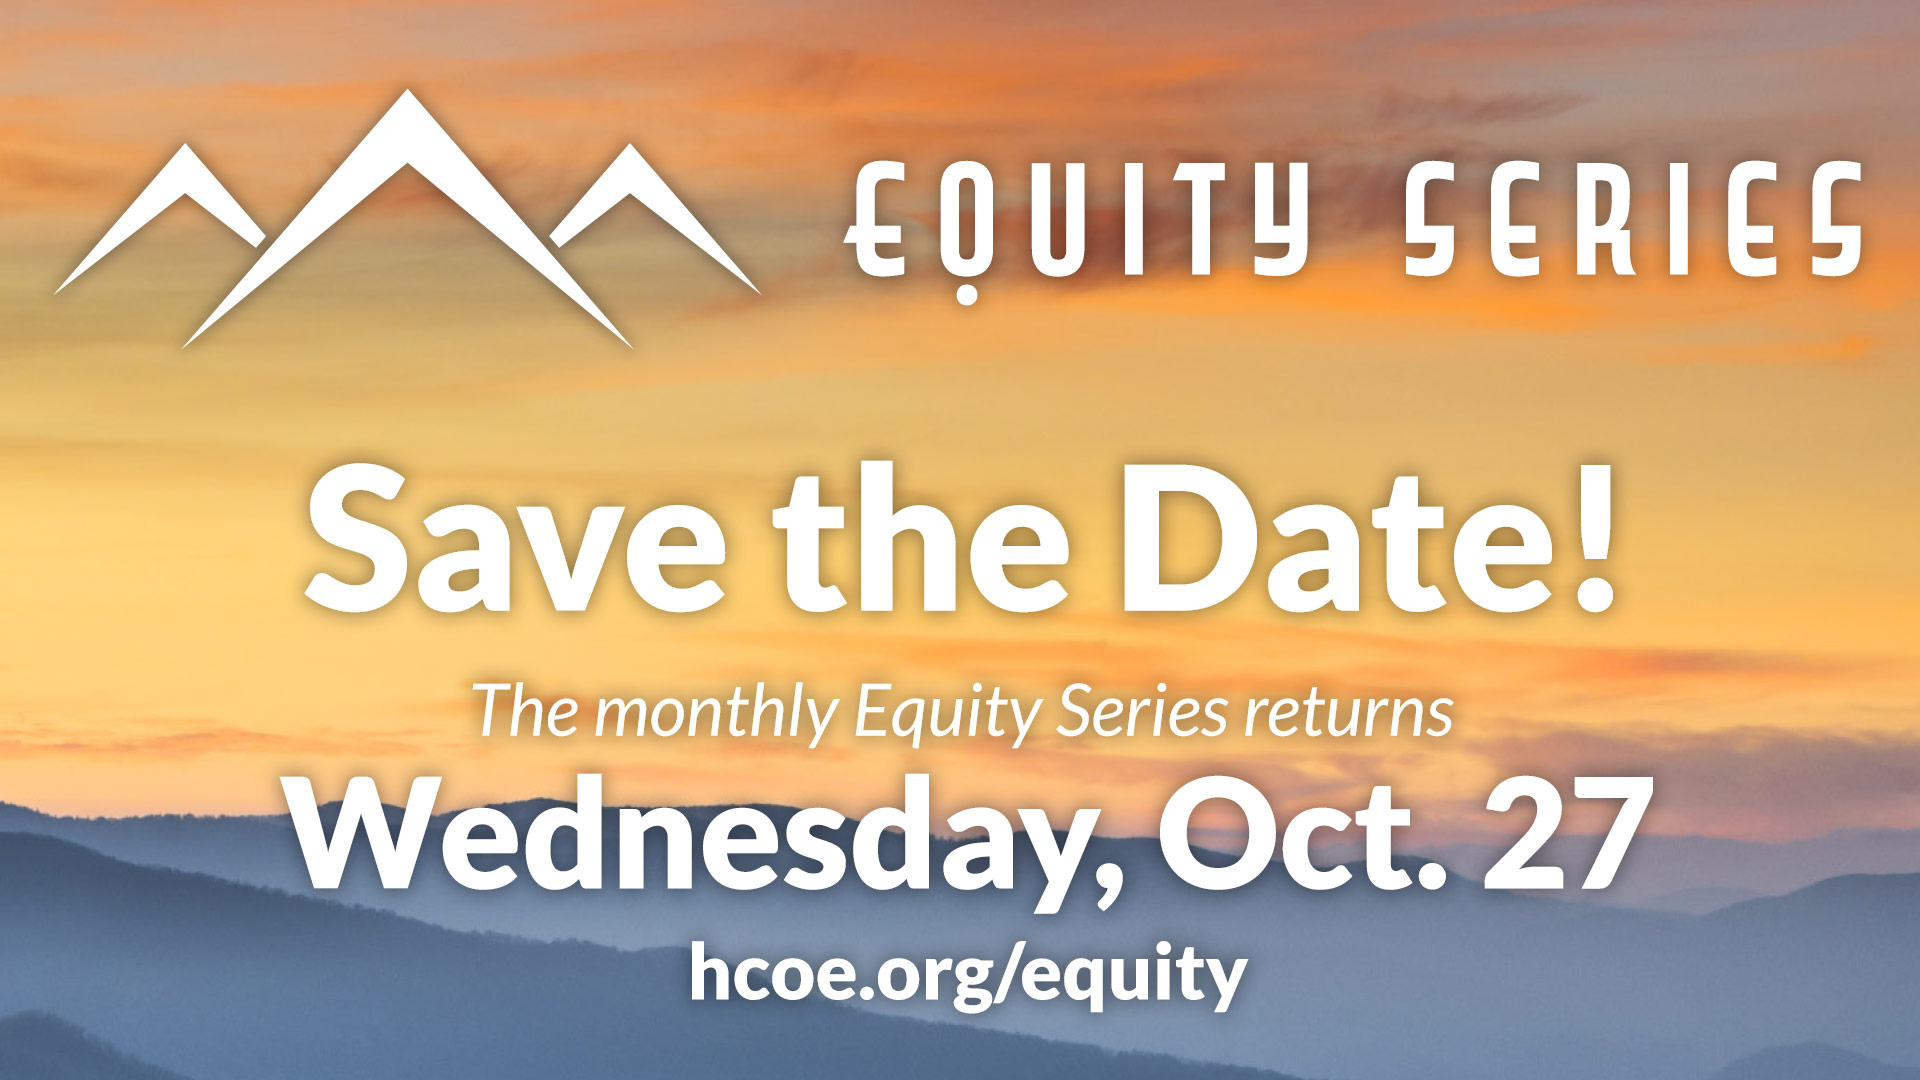 Save the date - Equity Series returns Oct 27